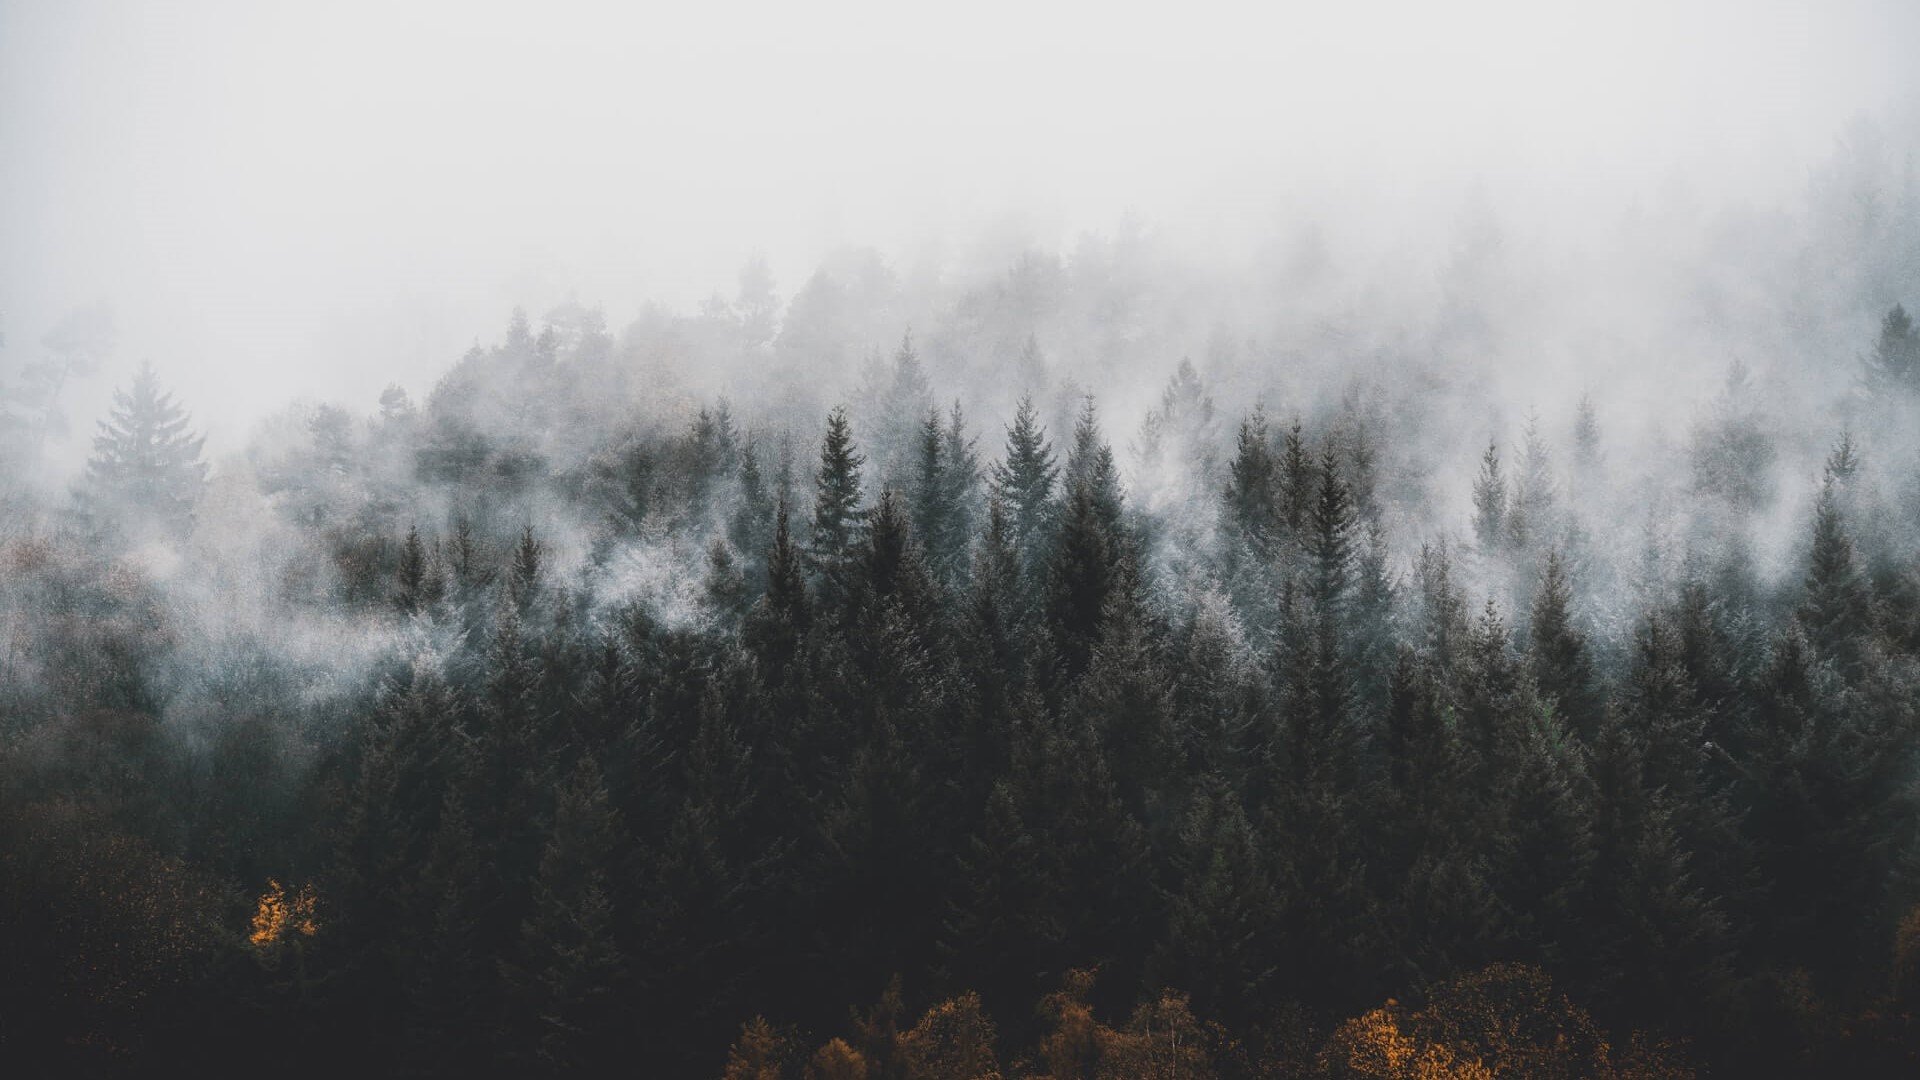 foggy_forest